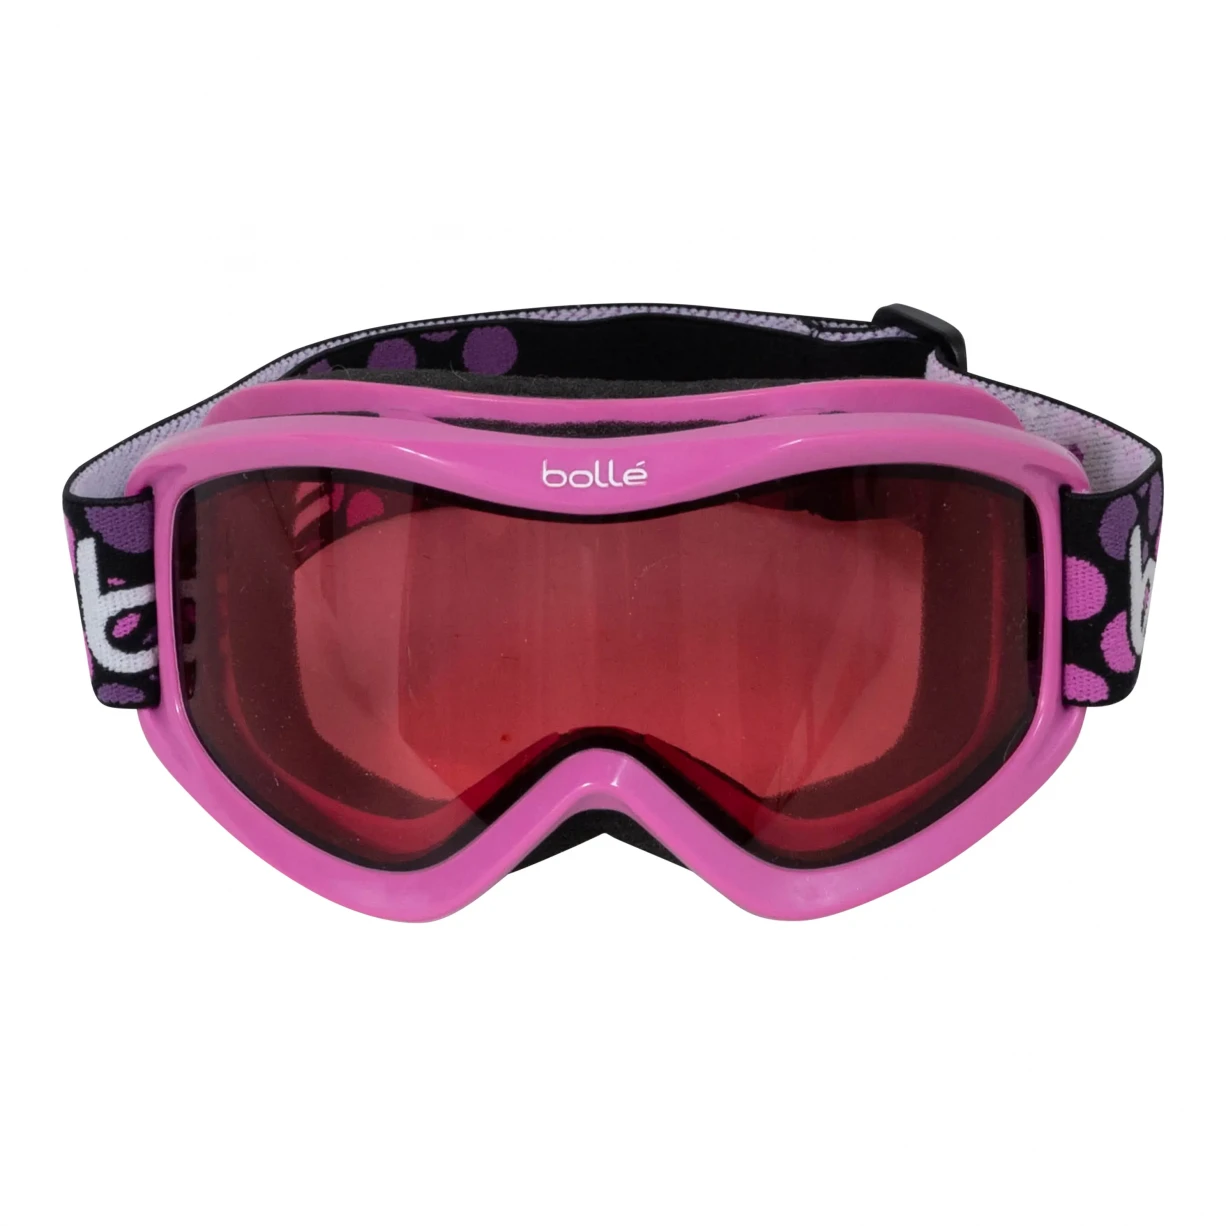 Bolle Volt Youth Ski Goggles